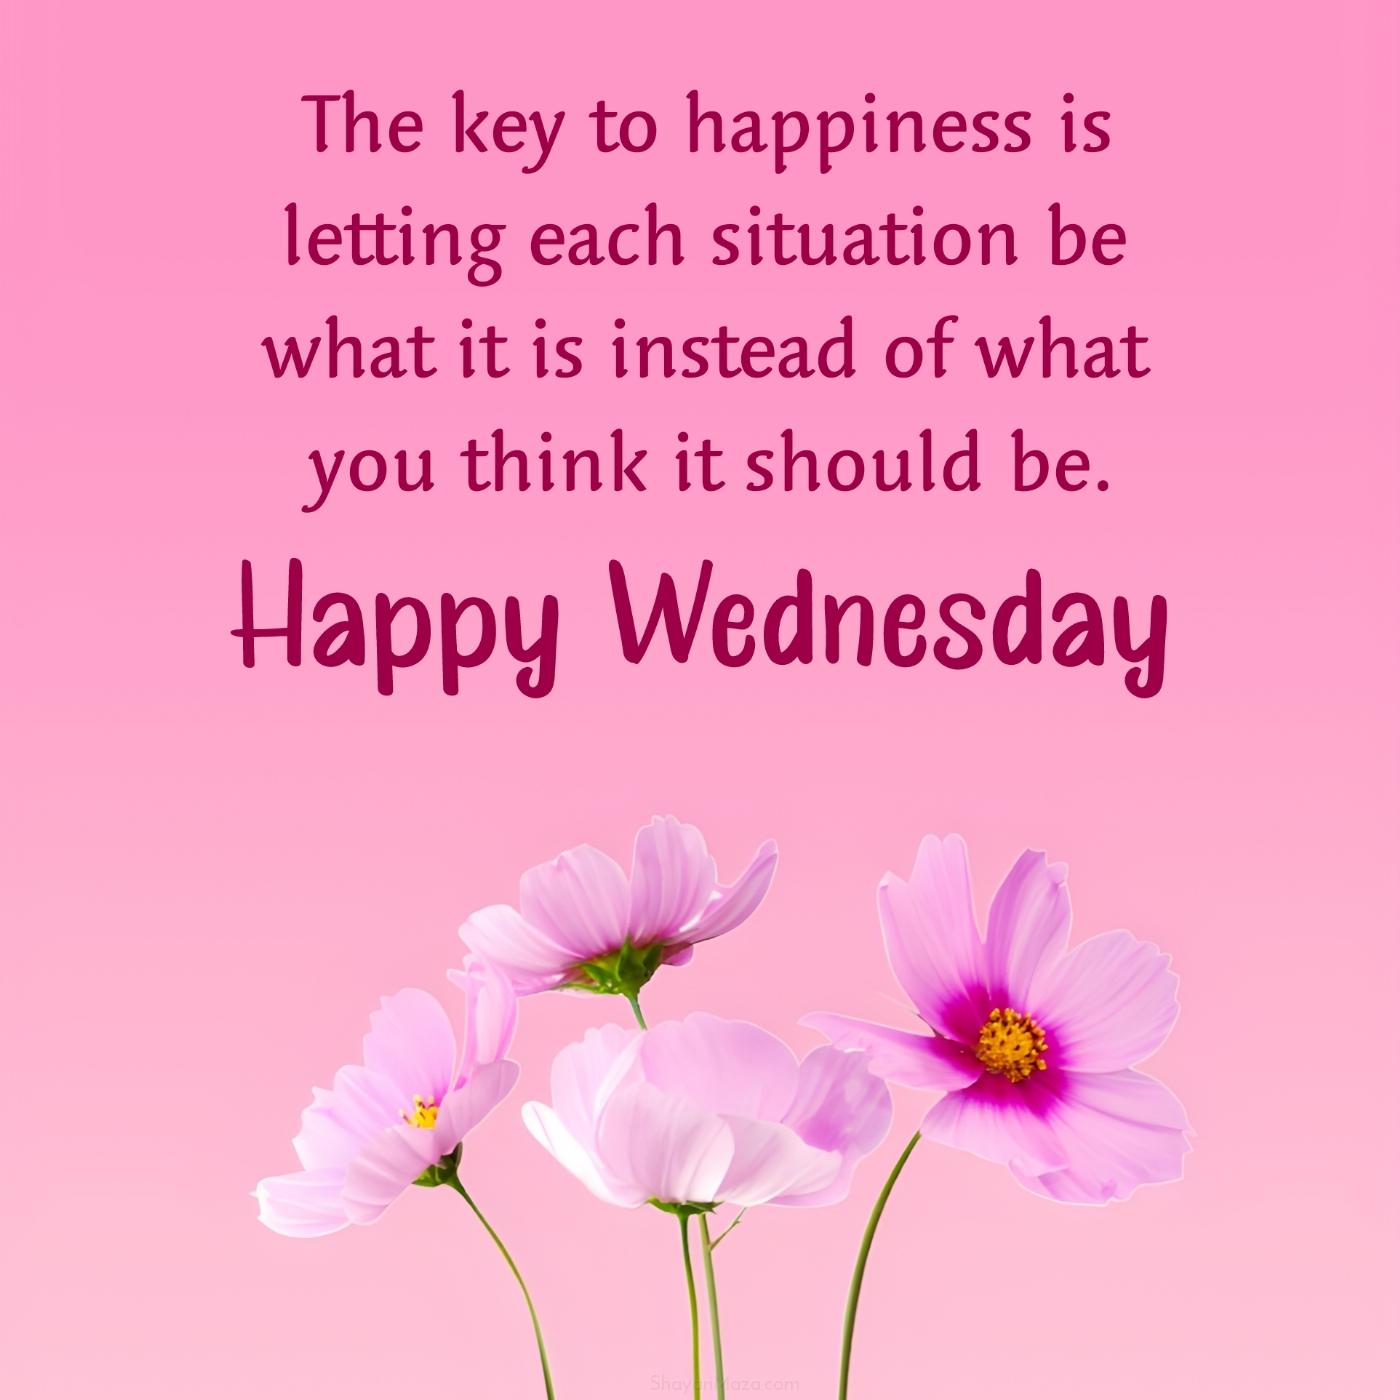 Happy Wednesday! The key to happiness is letting each situation